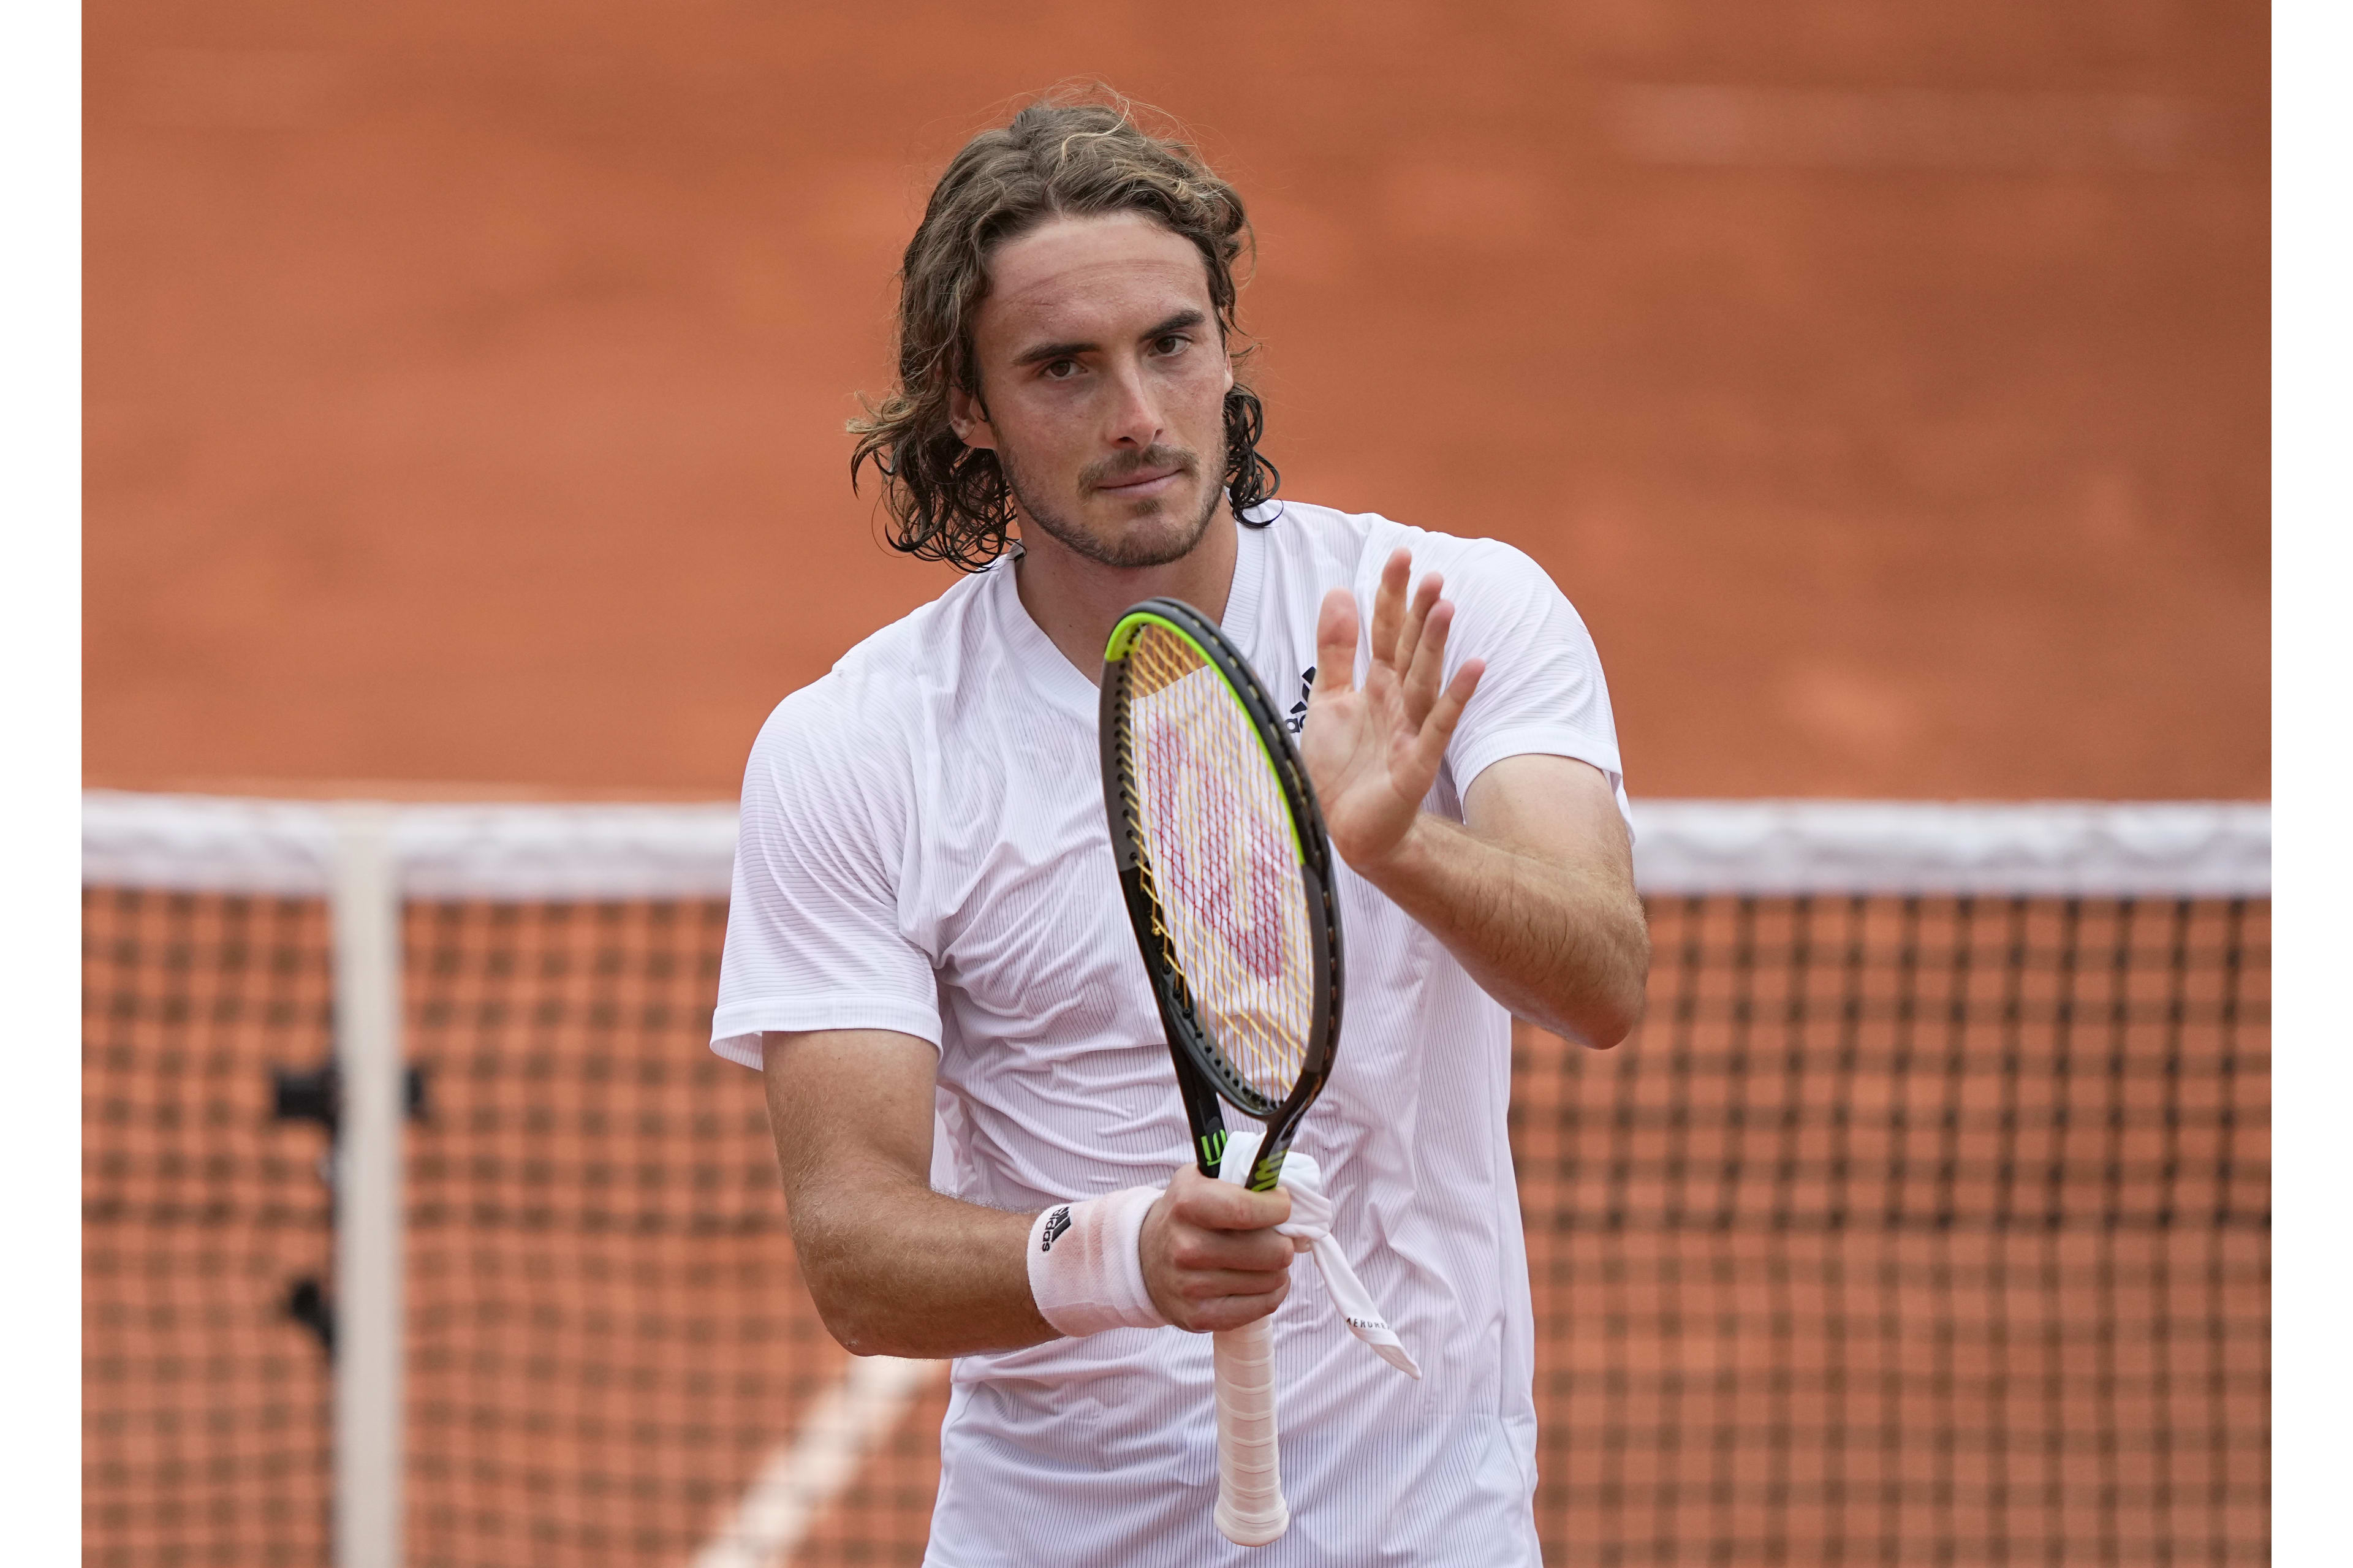 The Latest: Tsitsipas rallies past Isner at French Open | Tennis.com